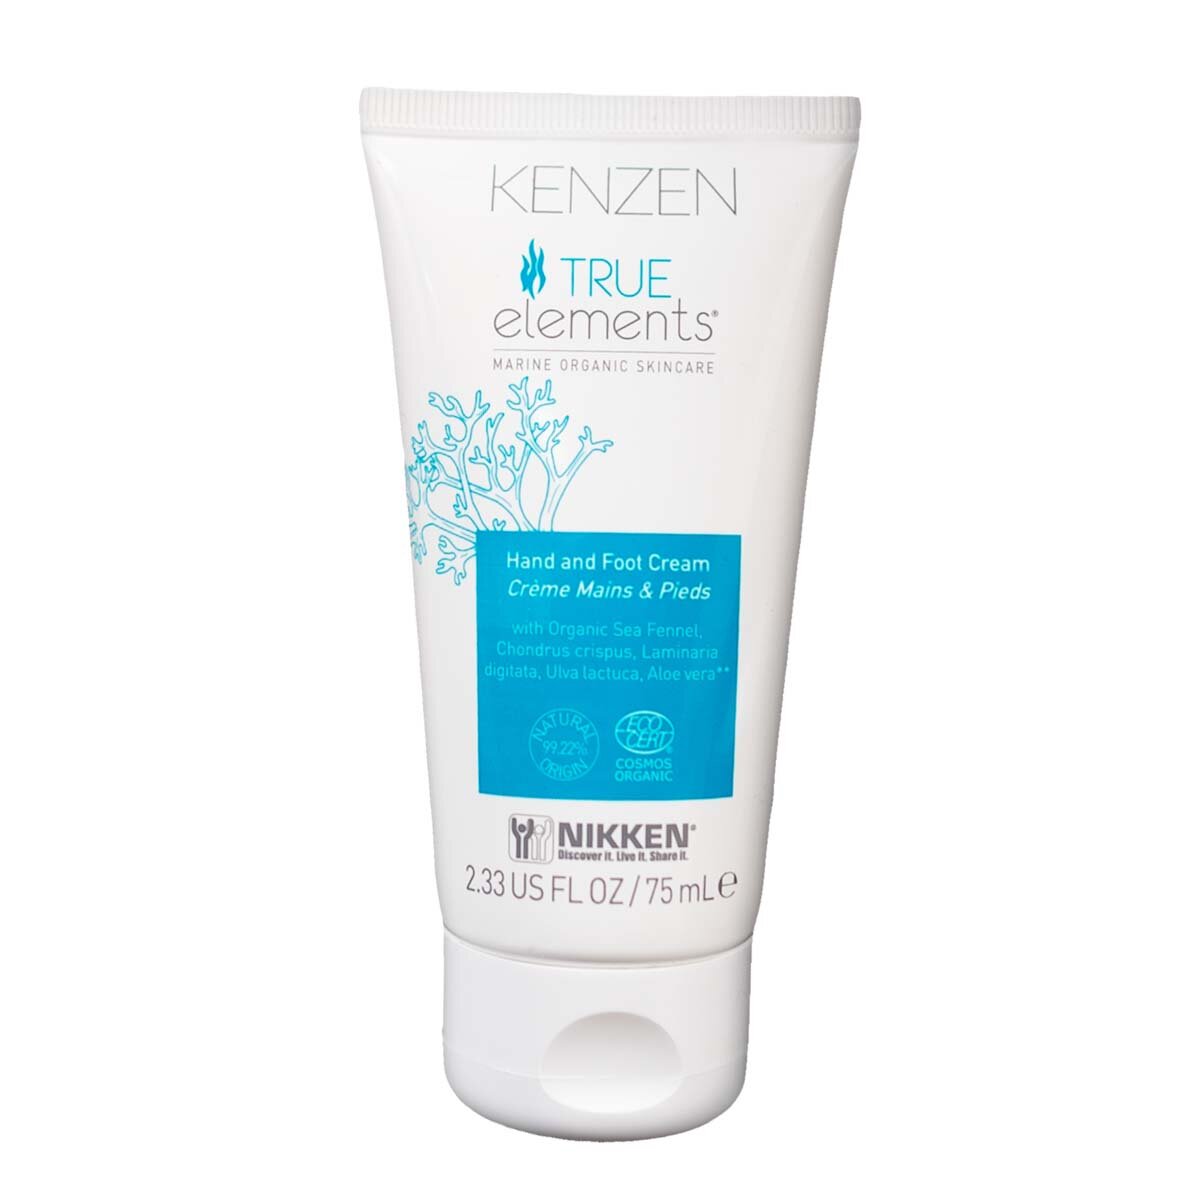 True Elements® Hand and Foot Cream